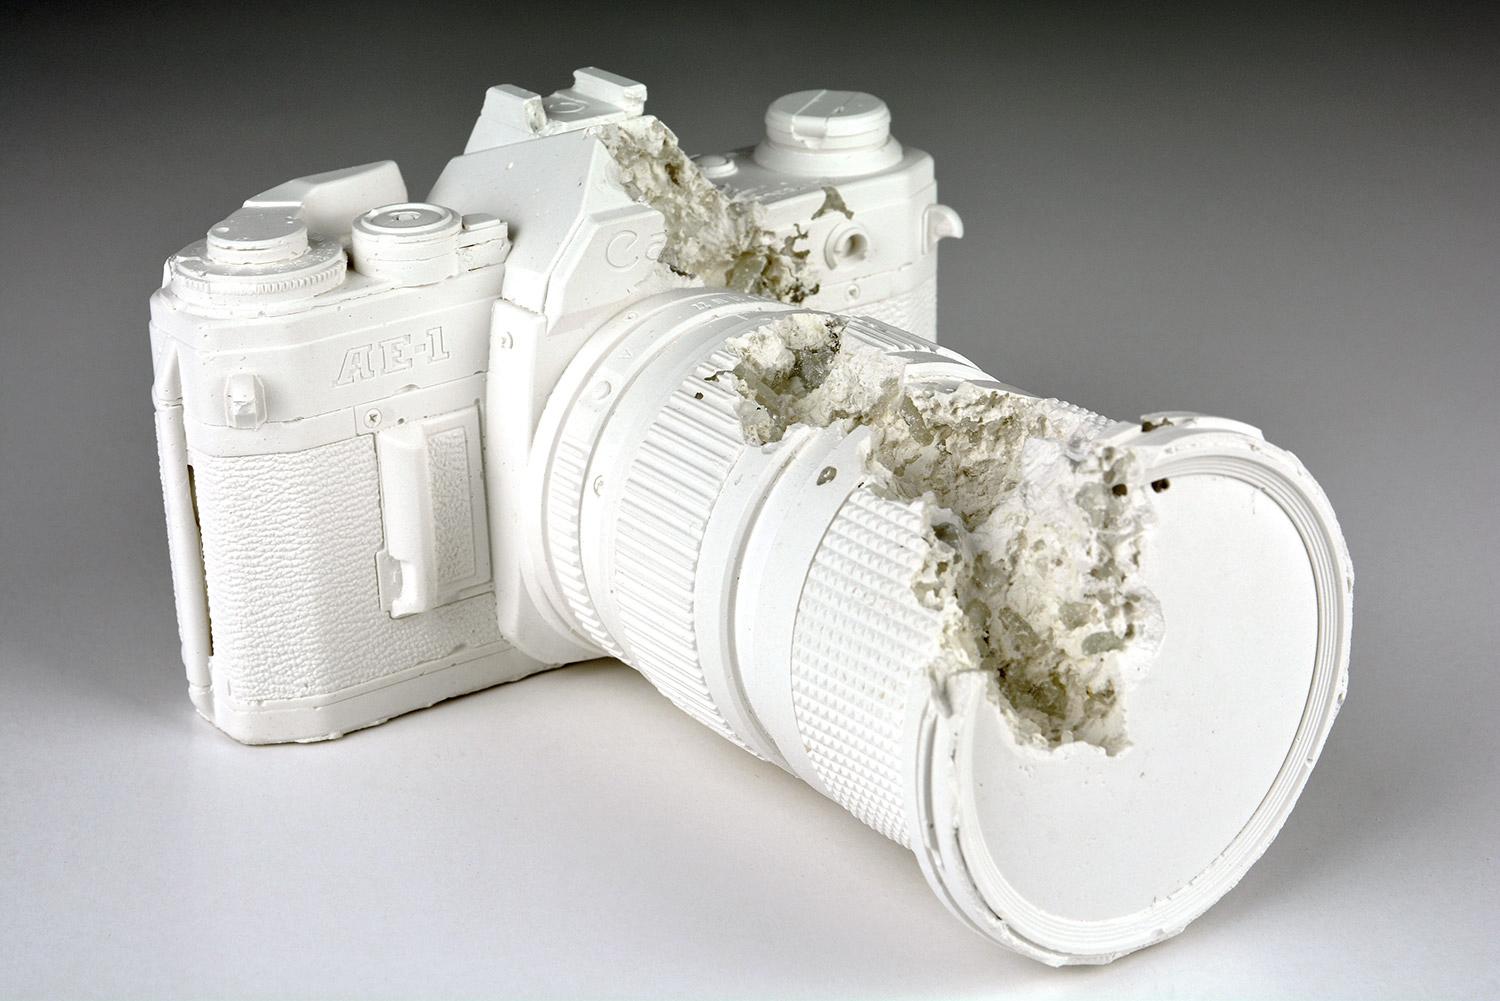 Daniel Arsham - FUTURE RELIC 02 - CANON AE1

Date of creation: 2014
Medium: Plaster and crushed glass
Edition number: 074/450
Size: 14.6 × 15.9 × 9.5 cm
Condition: In mint conditions, inside its original package. Never displayed, the box has only